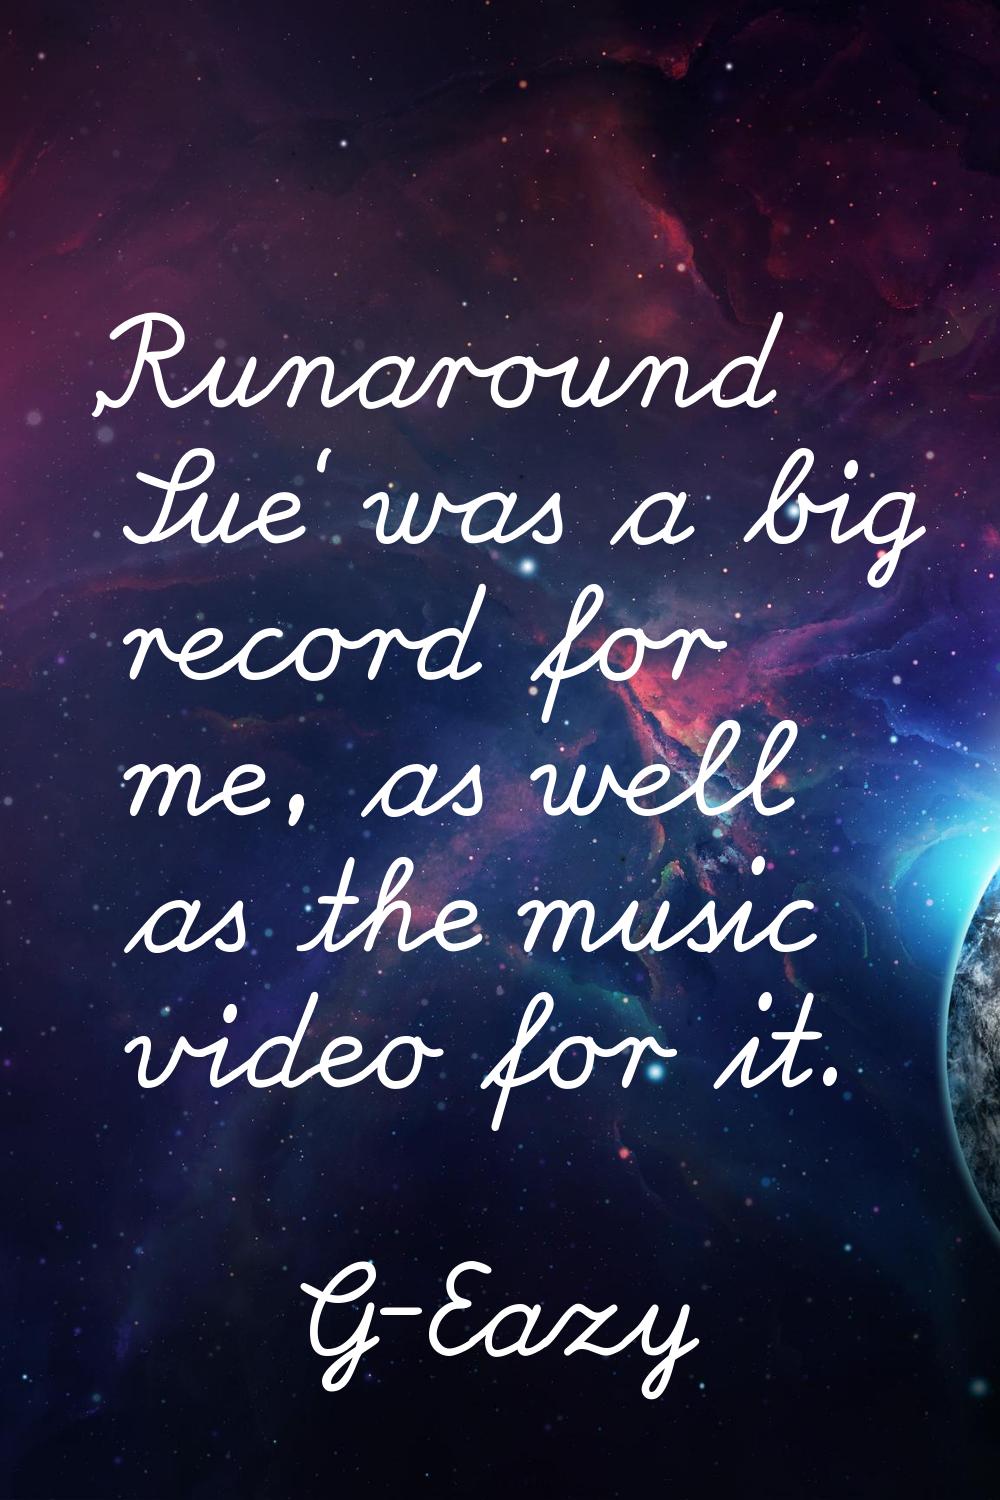 'Runaround Sue' was a big record for me, as well as the music video for it.